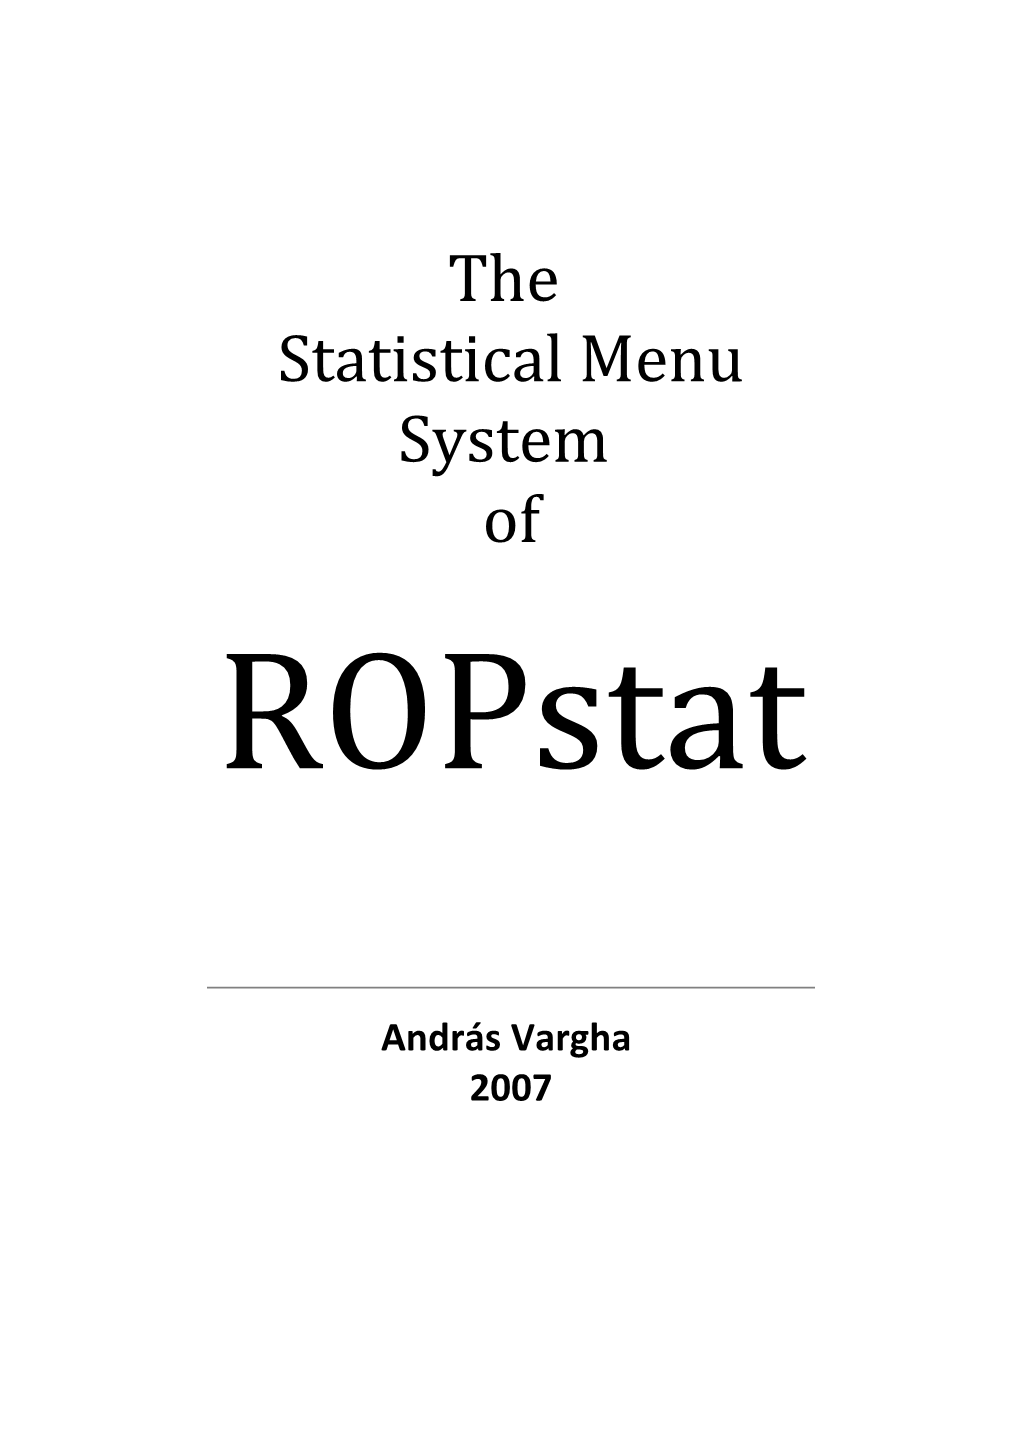 The Statistical Menu System of Ropstat